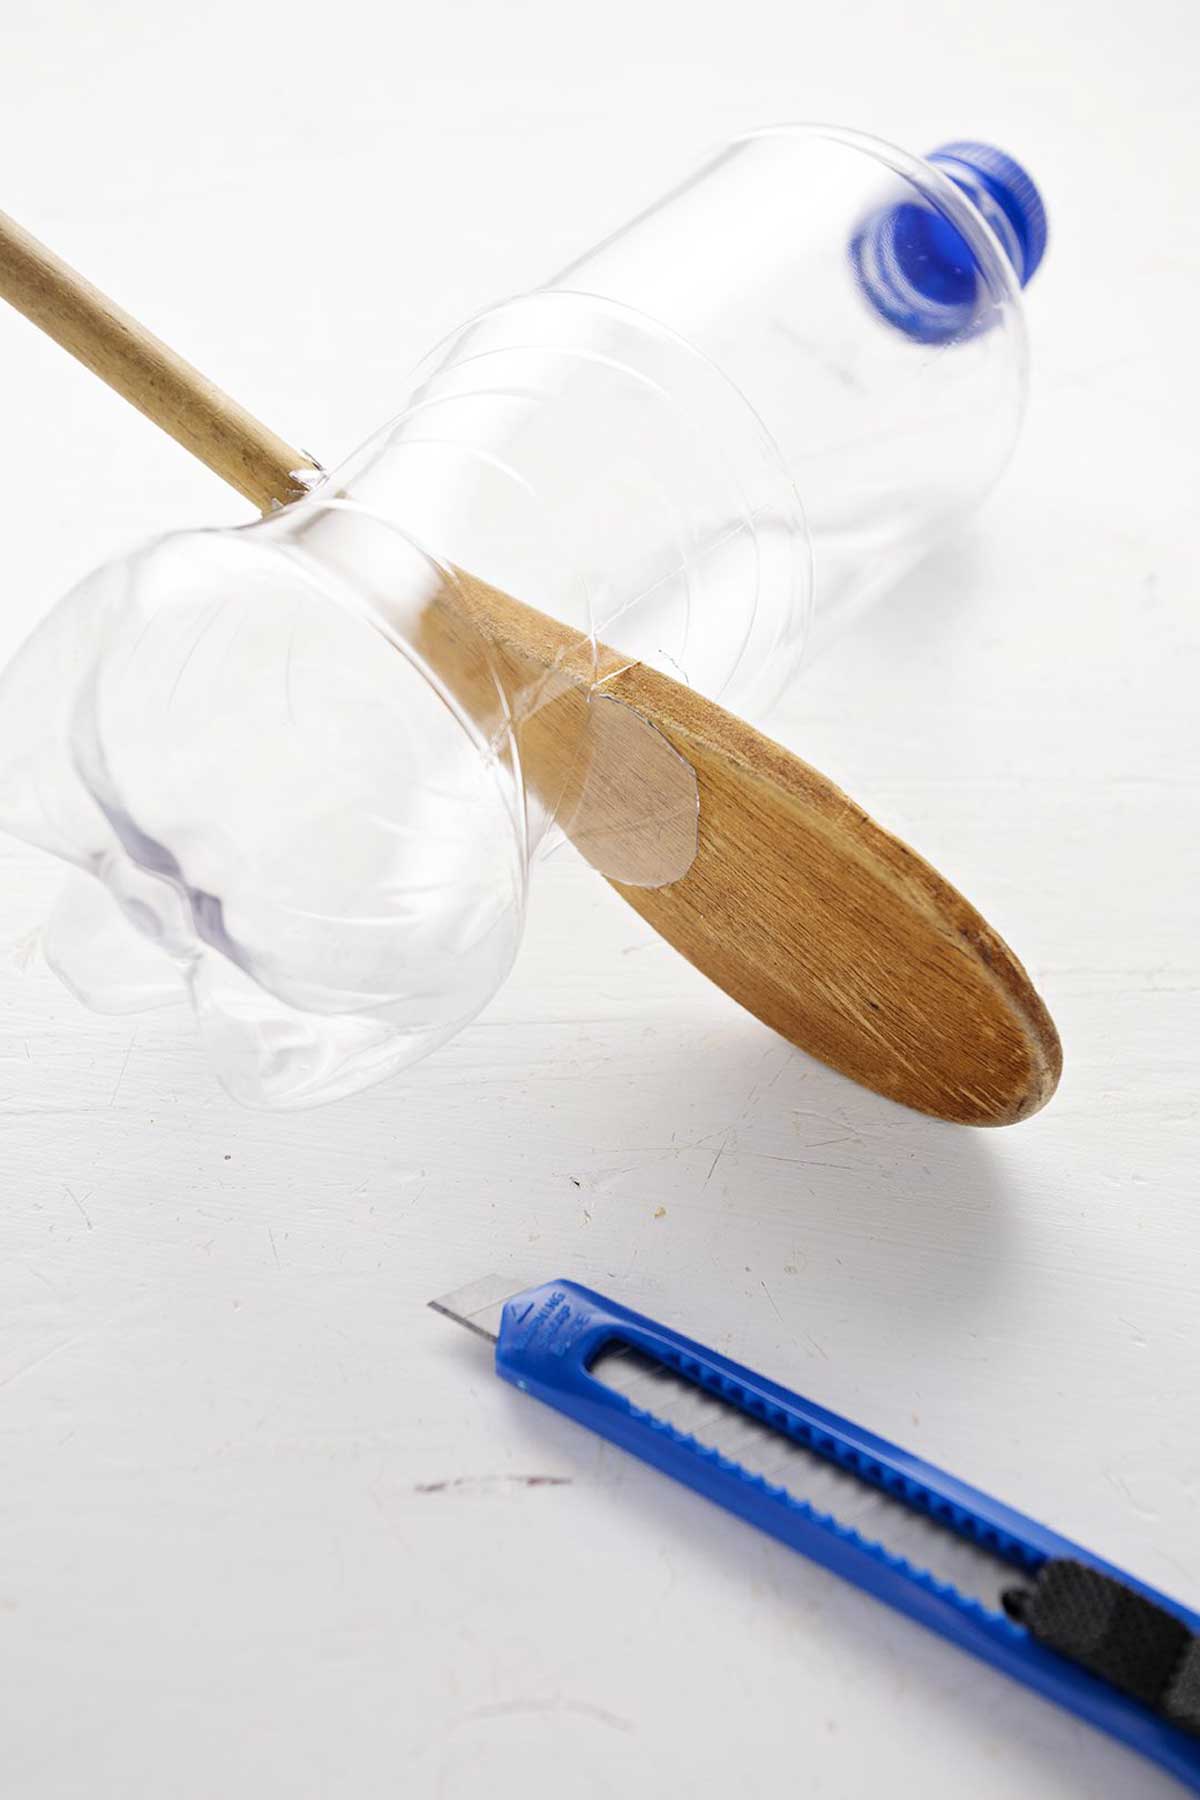 A plastic bottle with wooden spoons through it, and a utility knife.